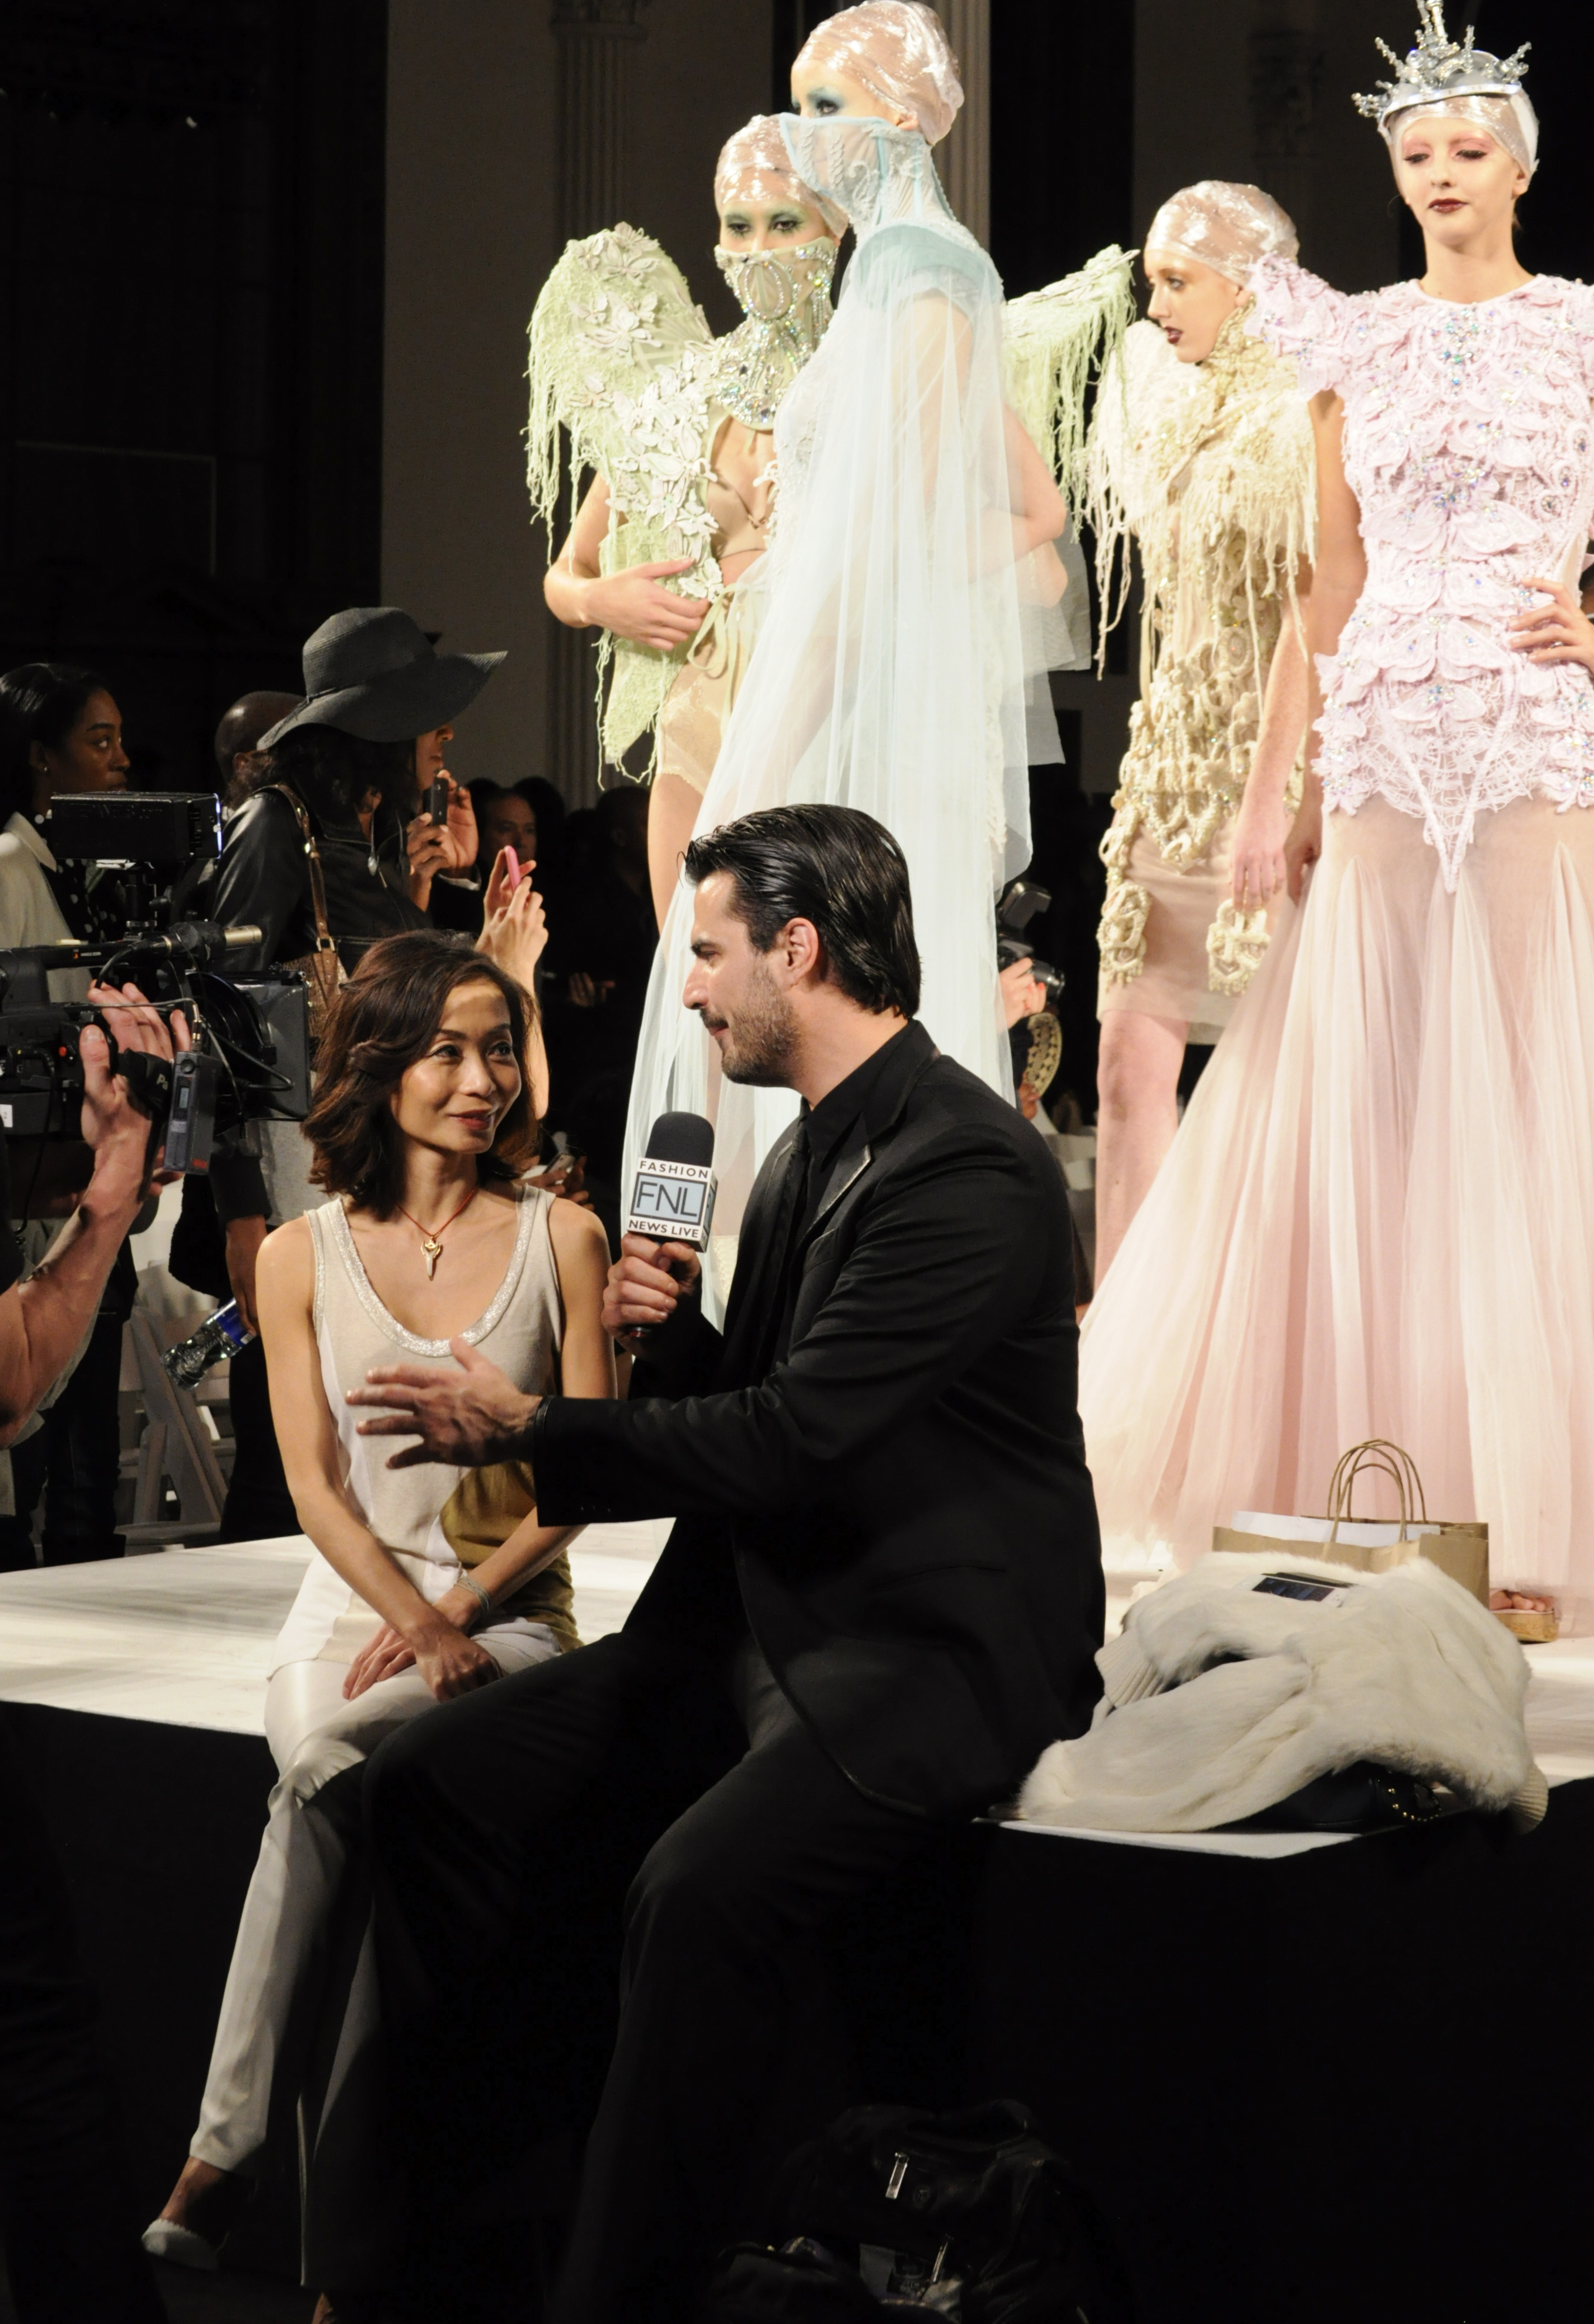 Sulinh Lafontaine speaks to Rocco Leo Gaglioti of Fashion News Live post Amato Furne Style FWLA show about her life as an actress, tv host, celebrity stylist and couture fashion designer.